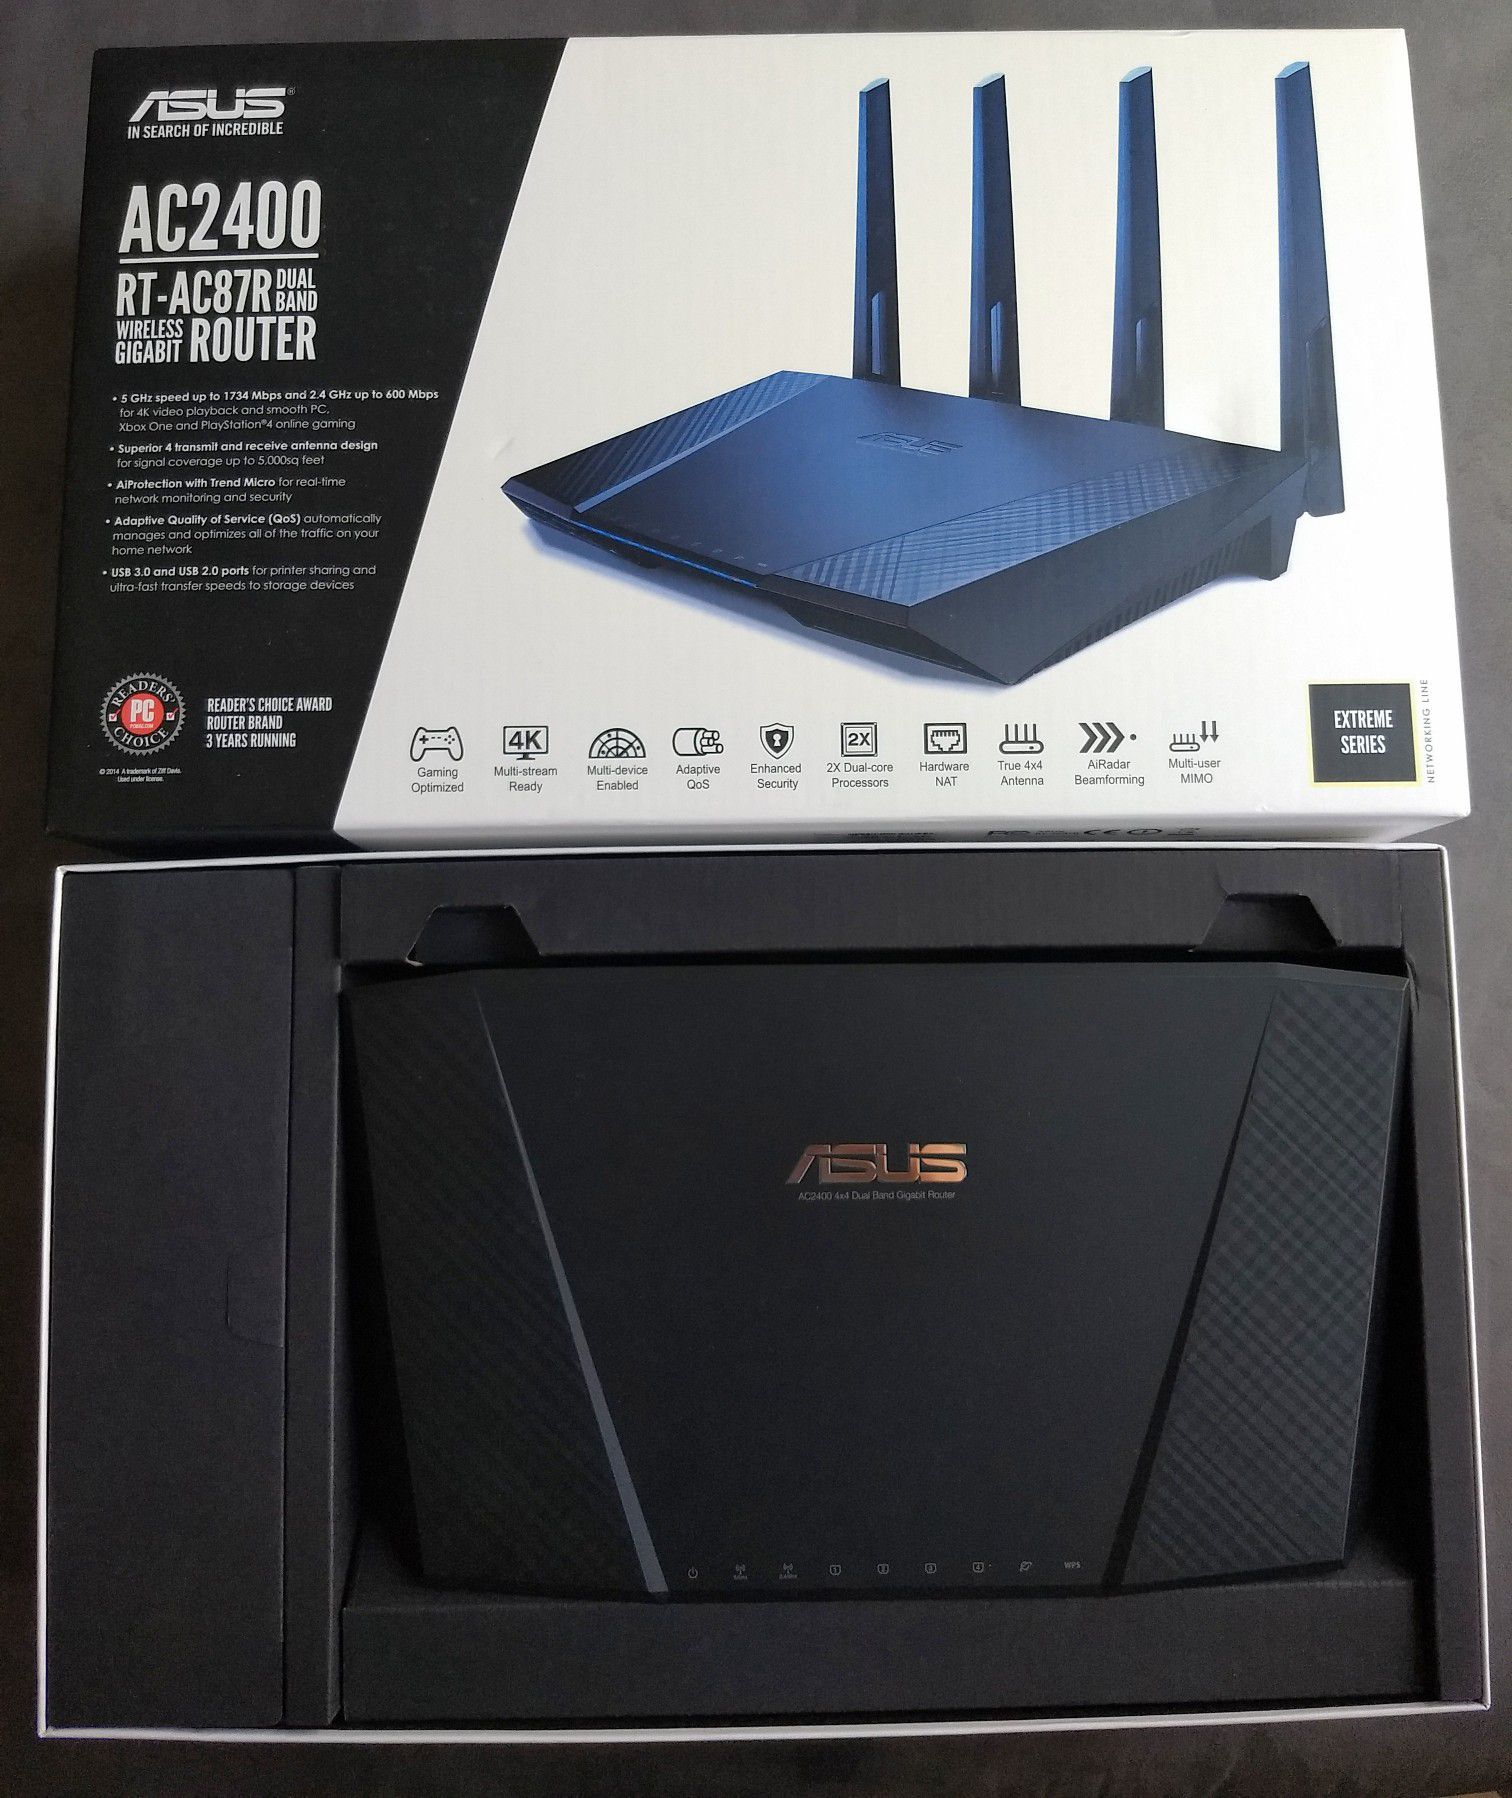 Asus Dualband AC2400 RT-AC87R Extreme Series Router